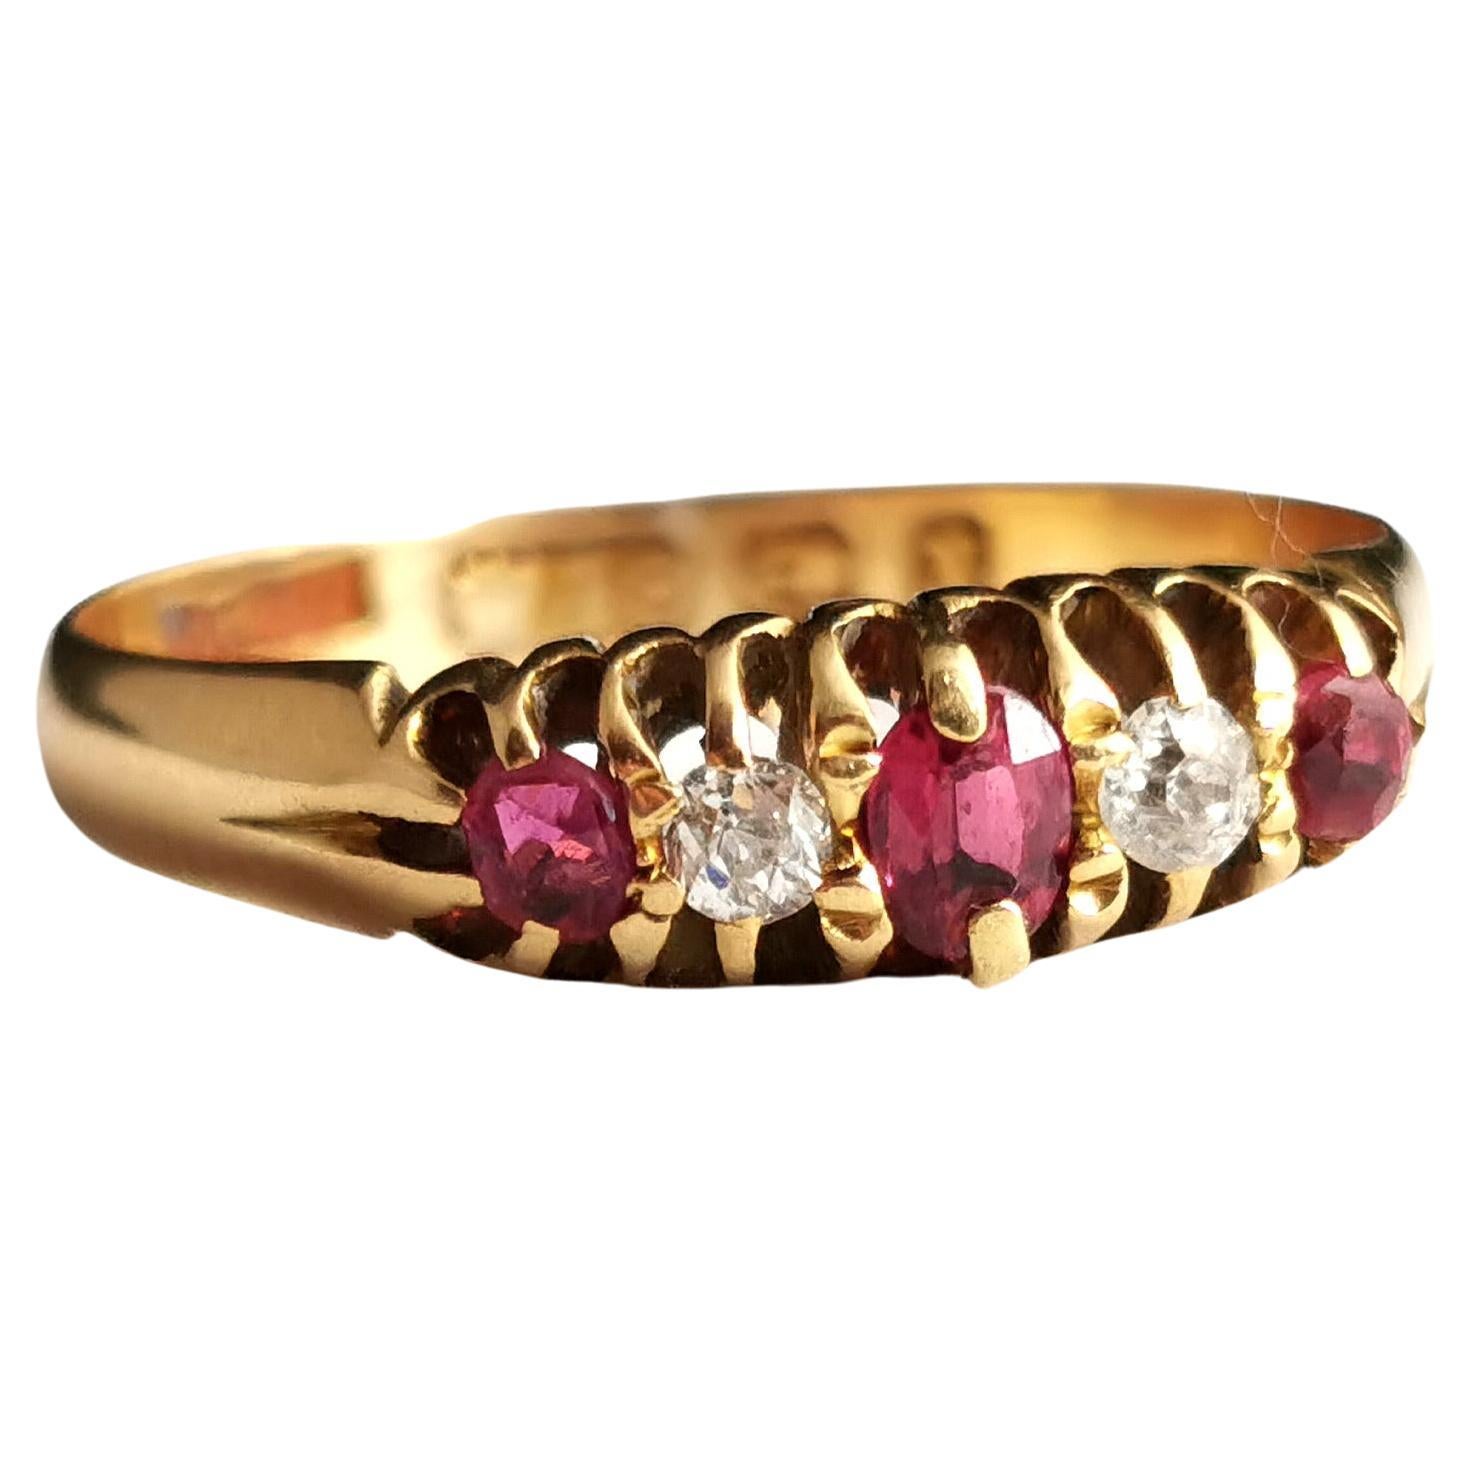 Antique Victorian Ruby and Diamond Ring, 18k Yellow Gold